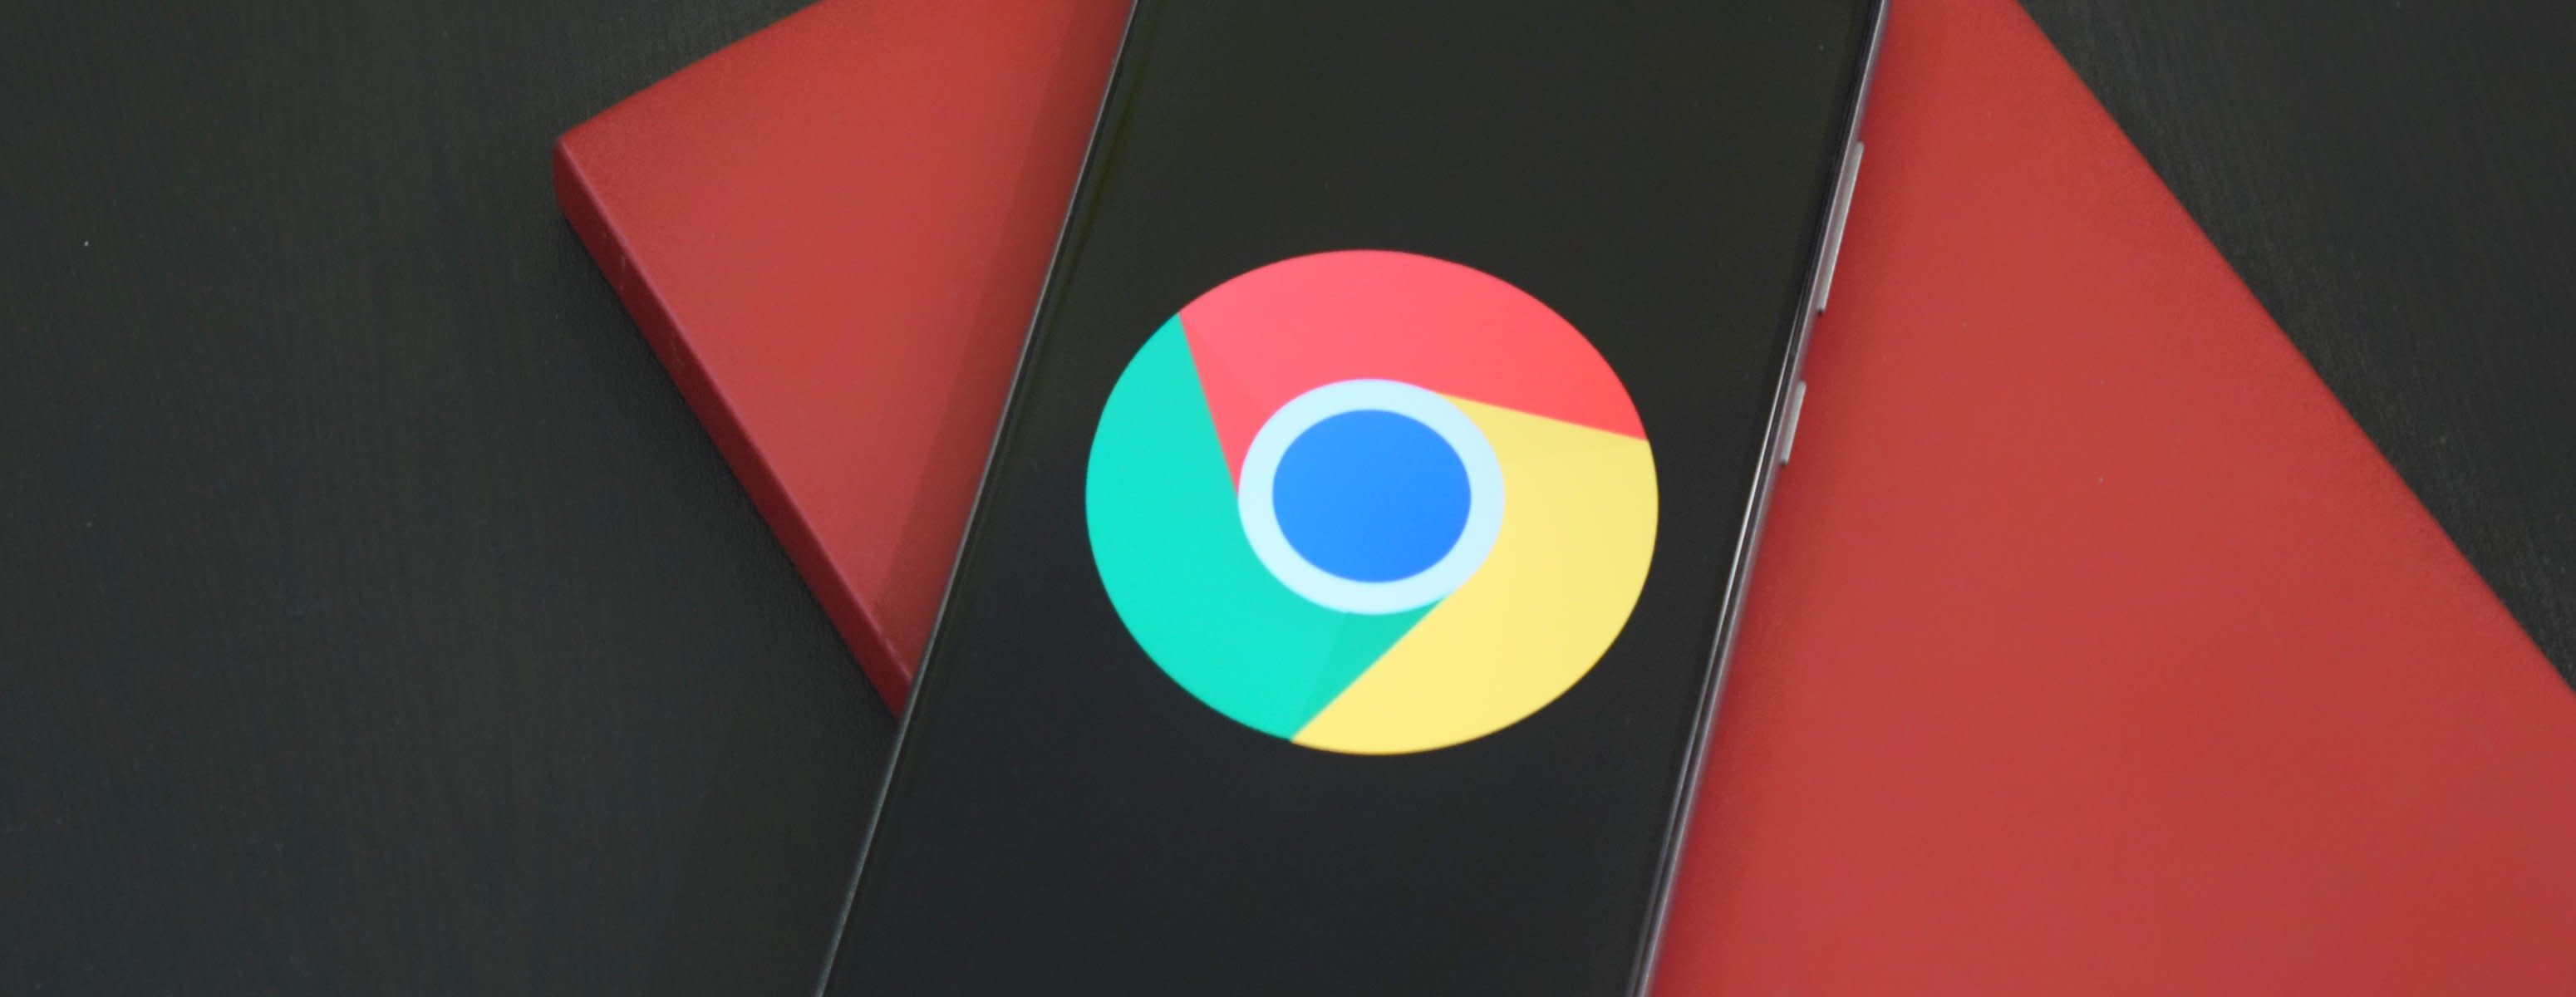 Mobile device on top of a book. Chrome logo presented on device screen.